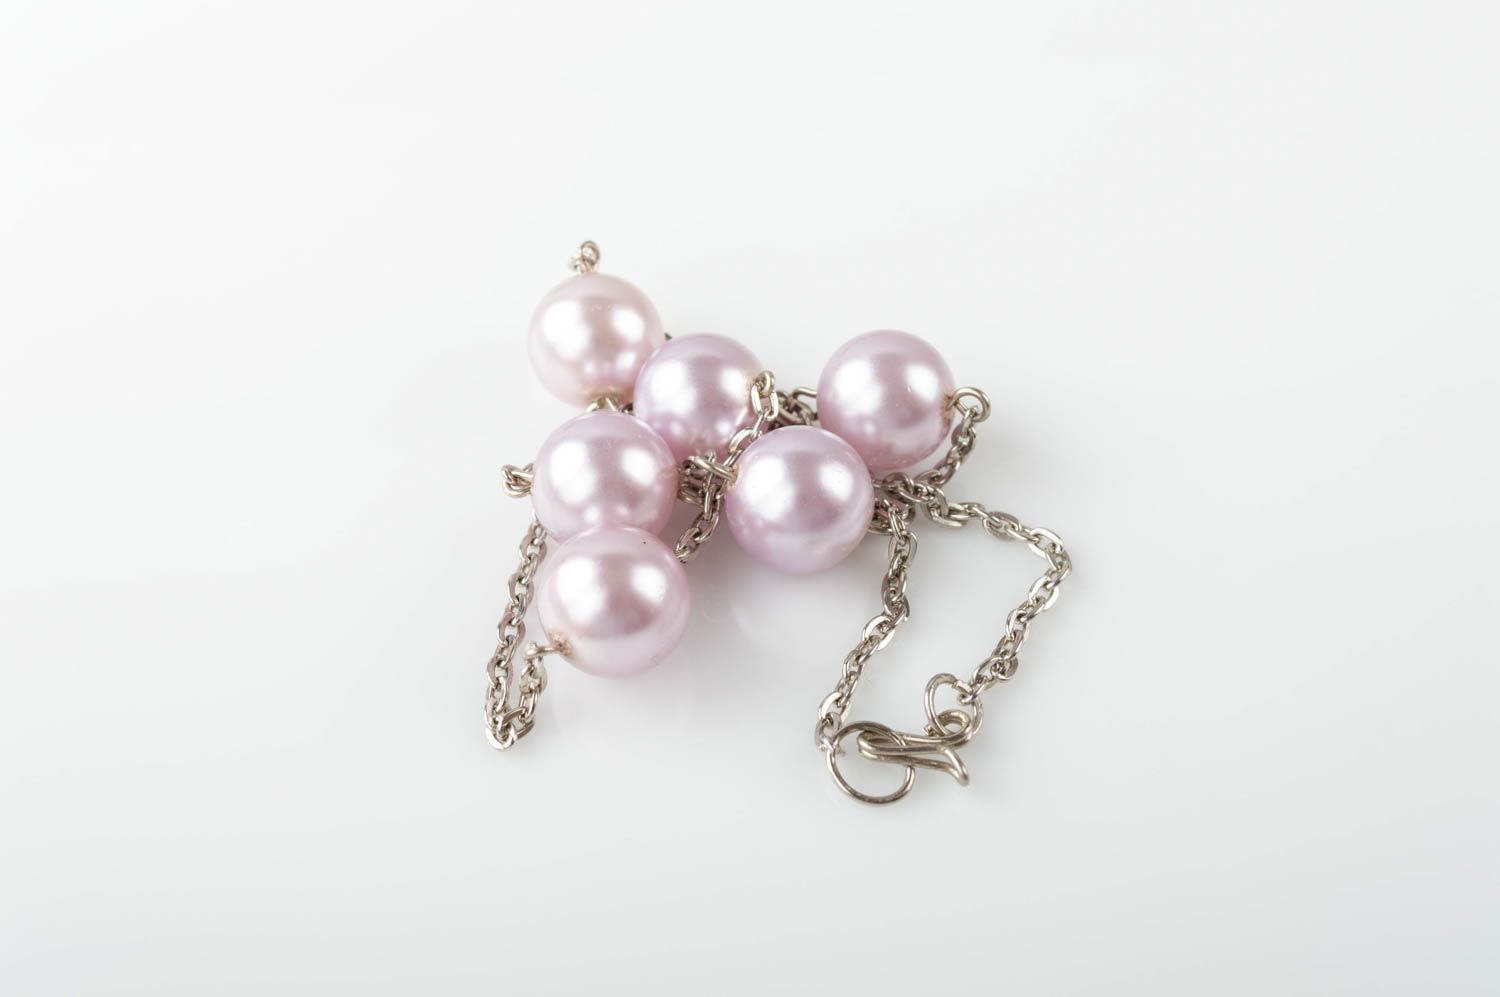 Handmade necklace accessory with artificial pearls stylish unusual jewelry photo 4